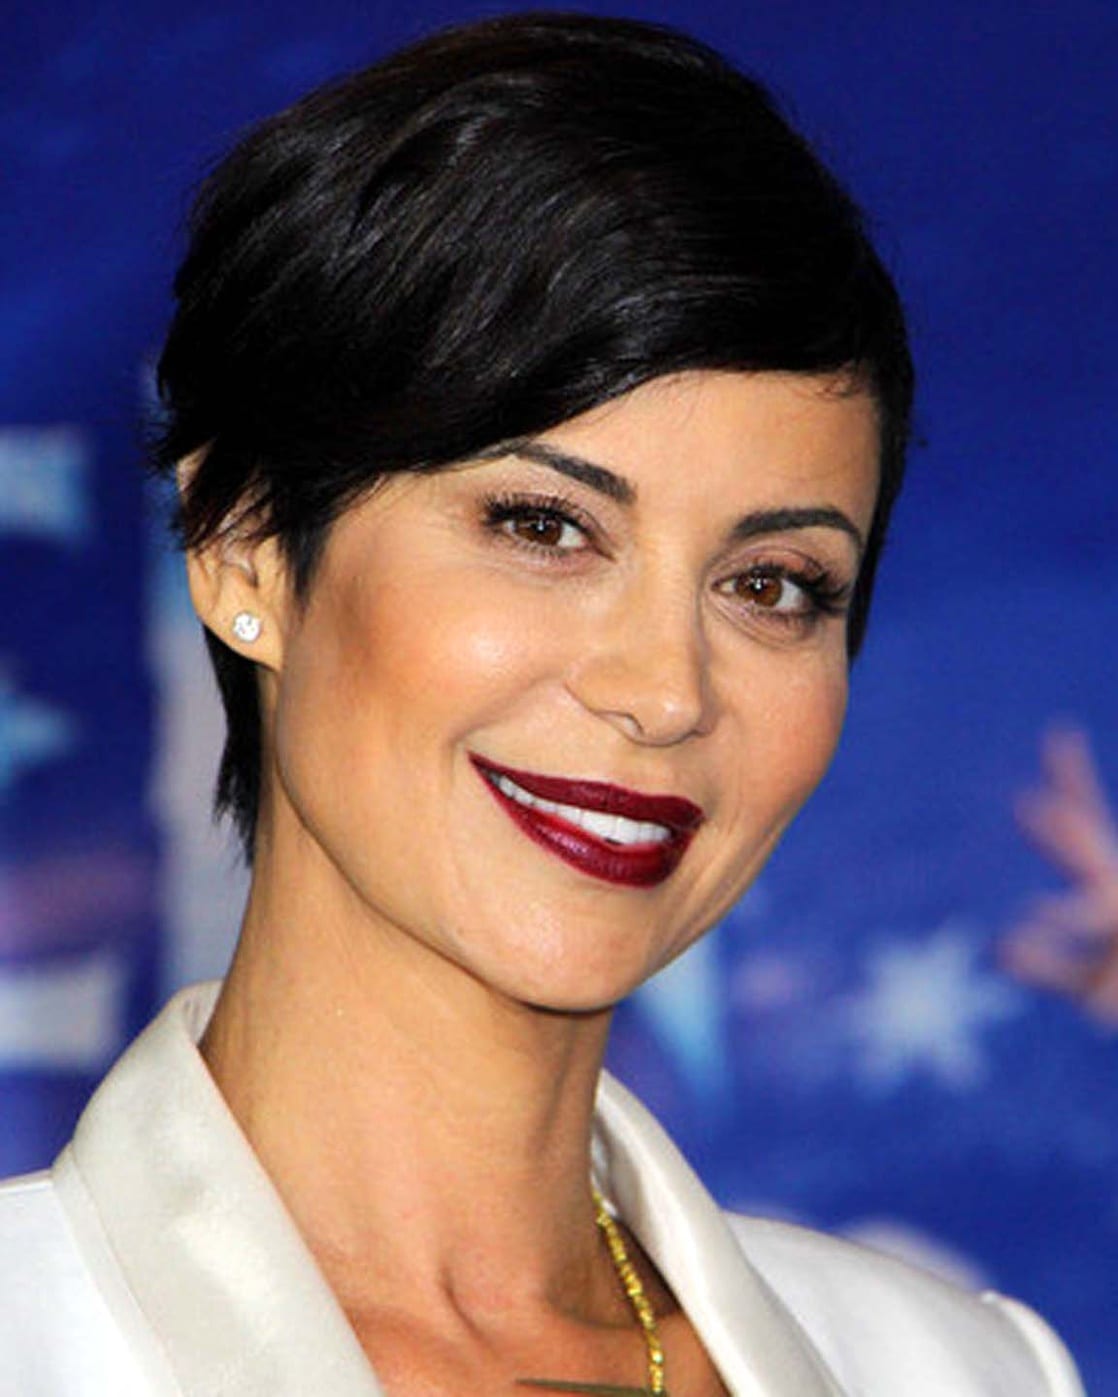 Catherine Bell at Disney's Frozen Premiere in L.A.